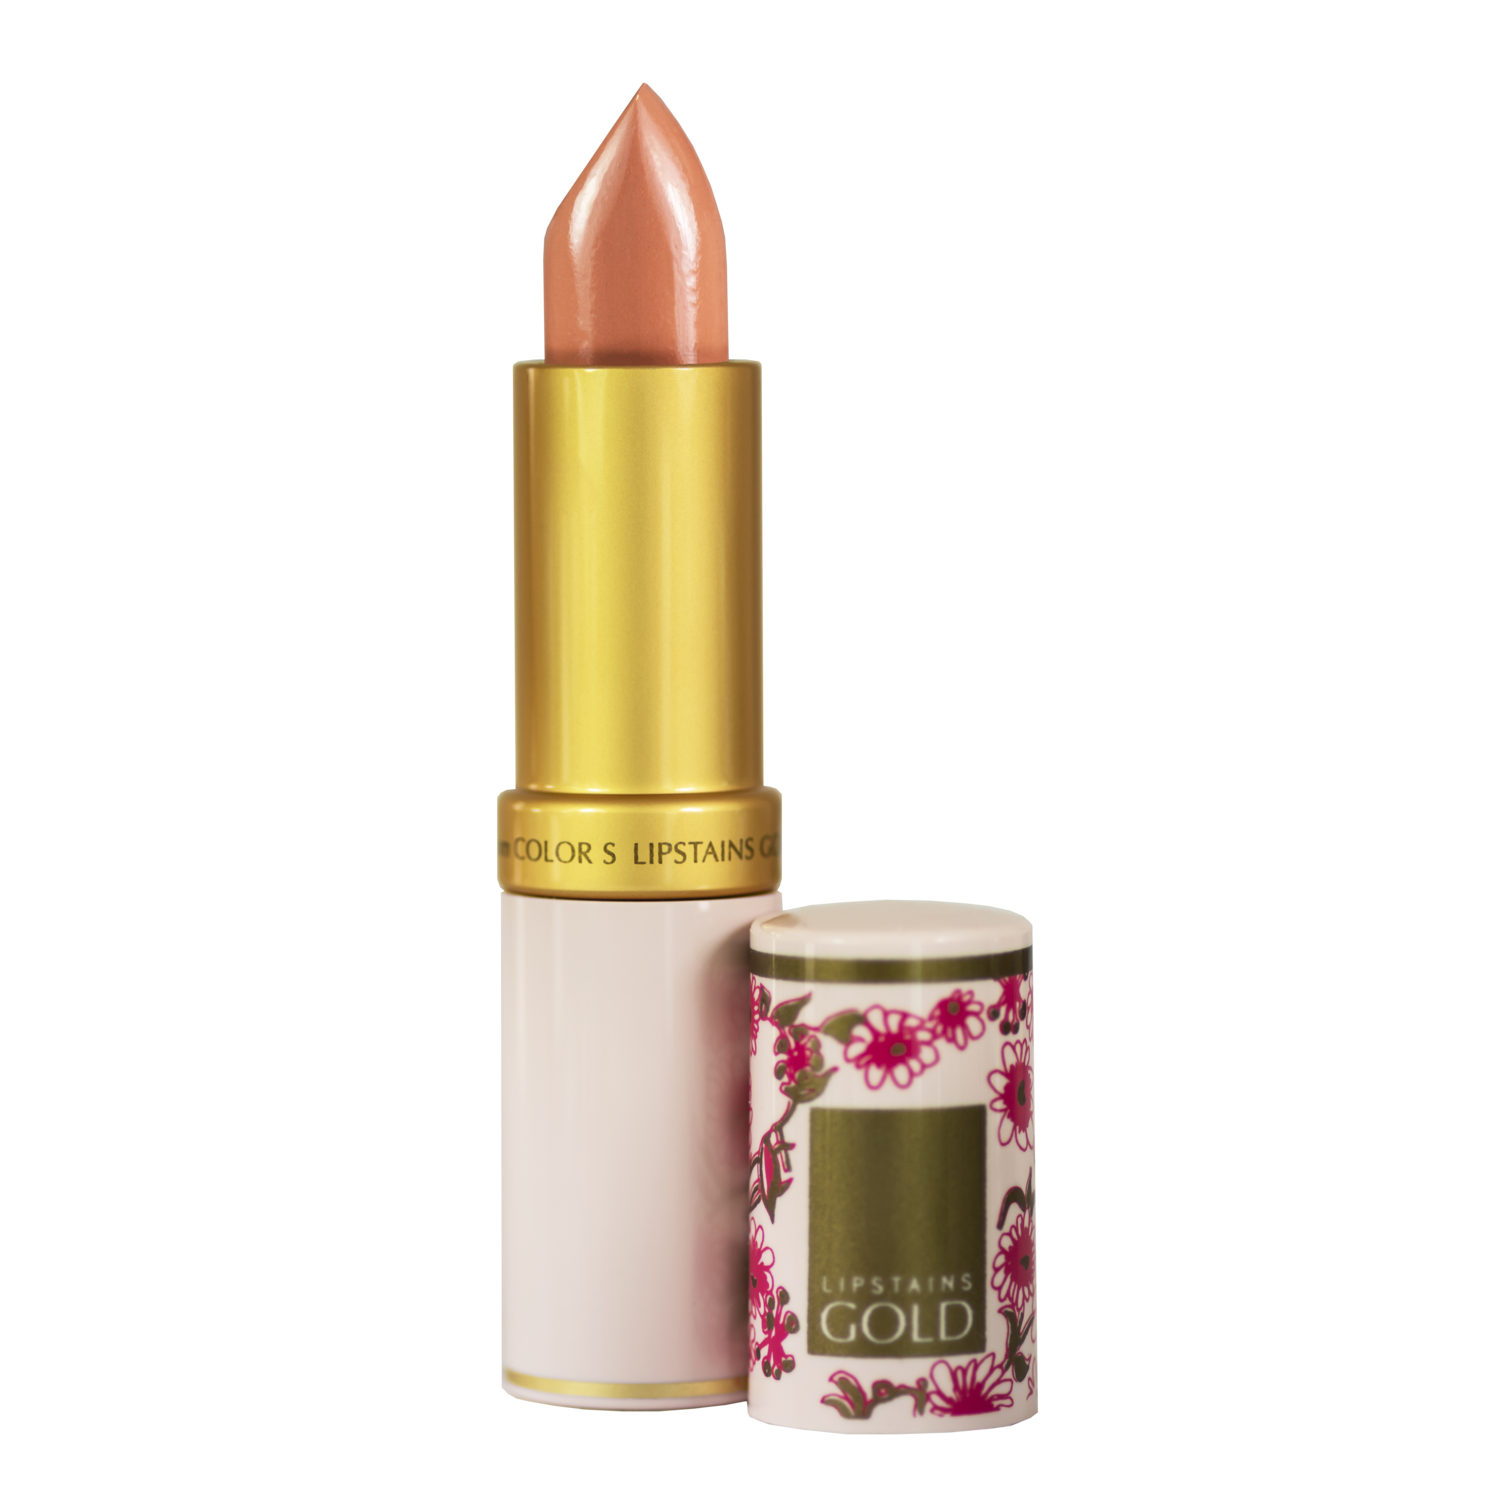 Lipstains Gold All-In-One Lipstick